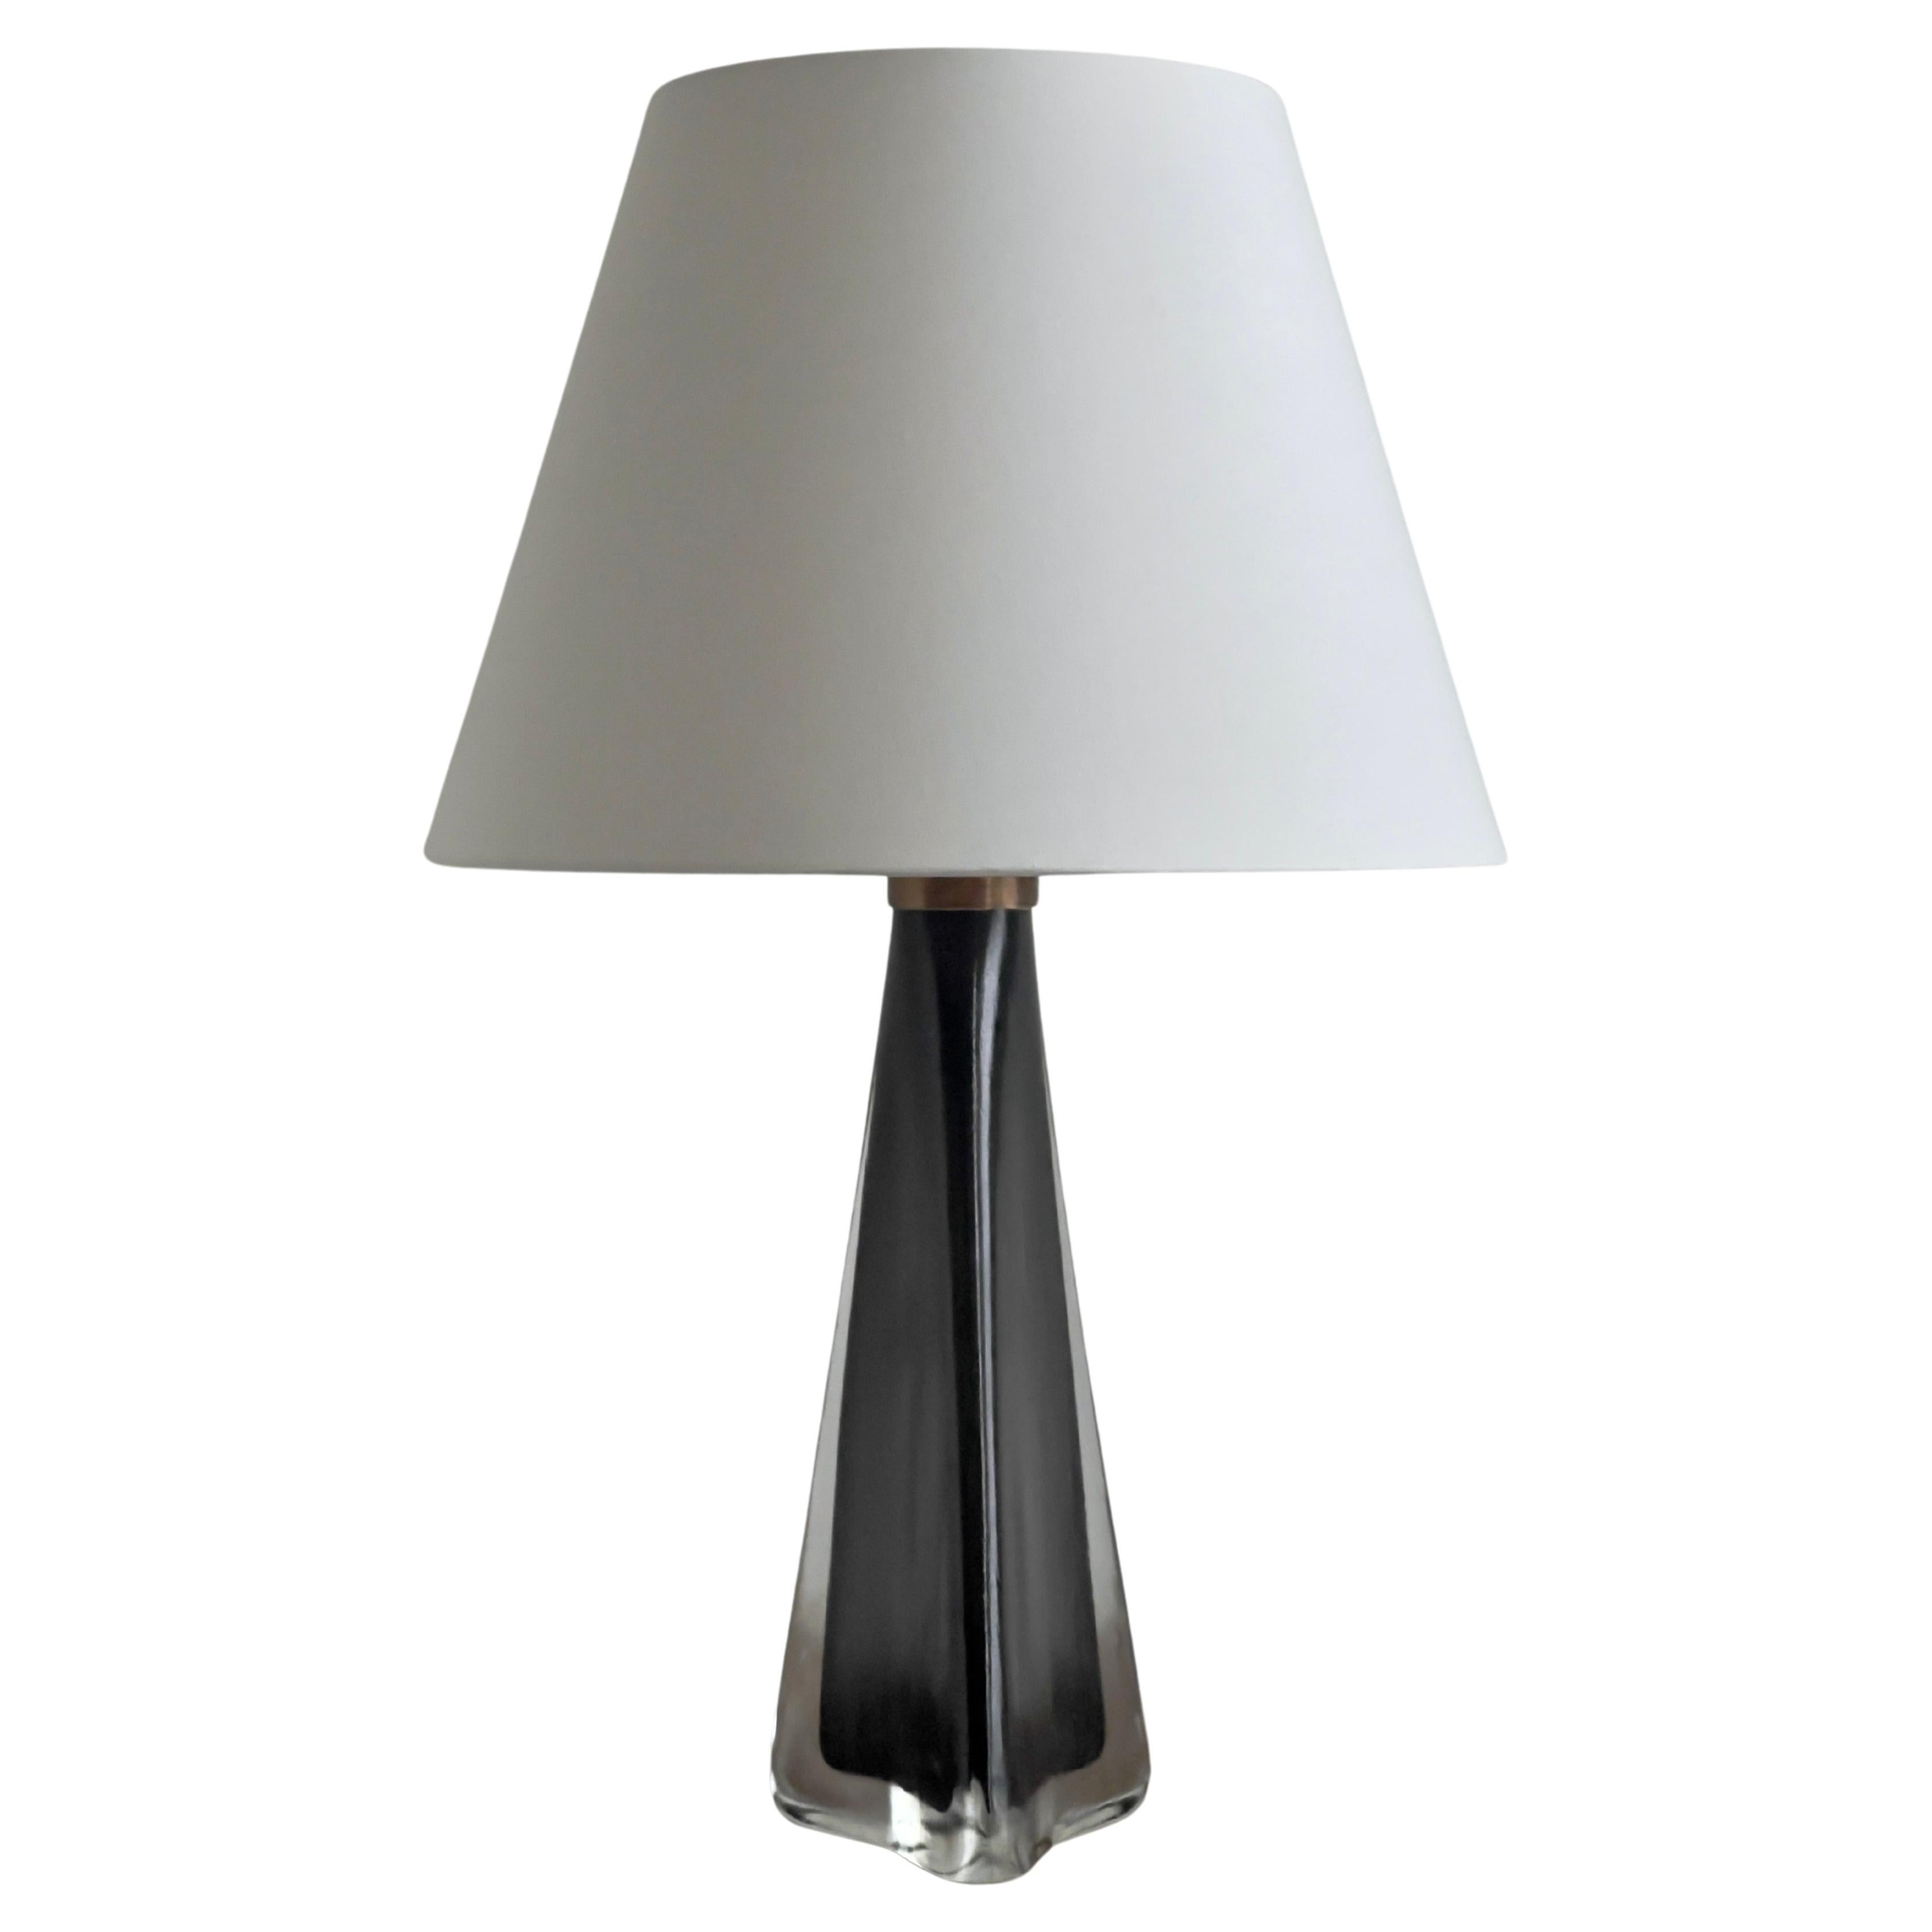 Large table lamp by Carl Fagerlund for Orrefors in black and clear frosted glass For Sale